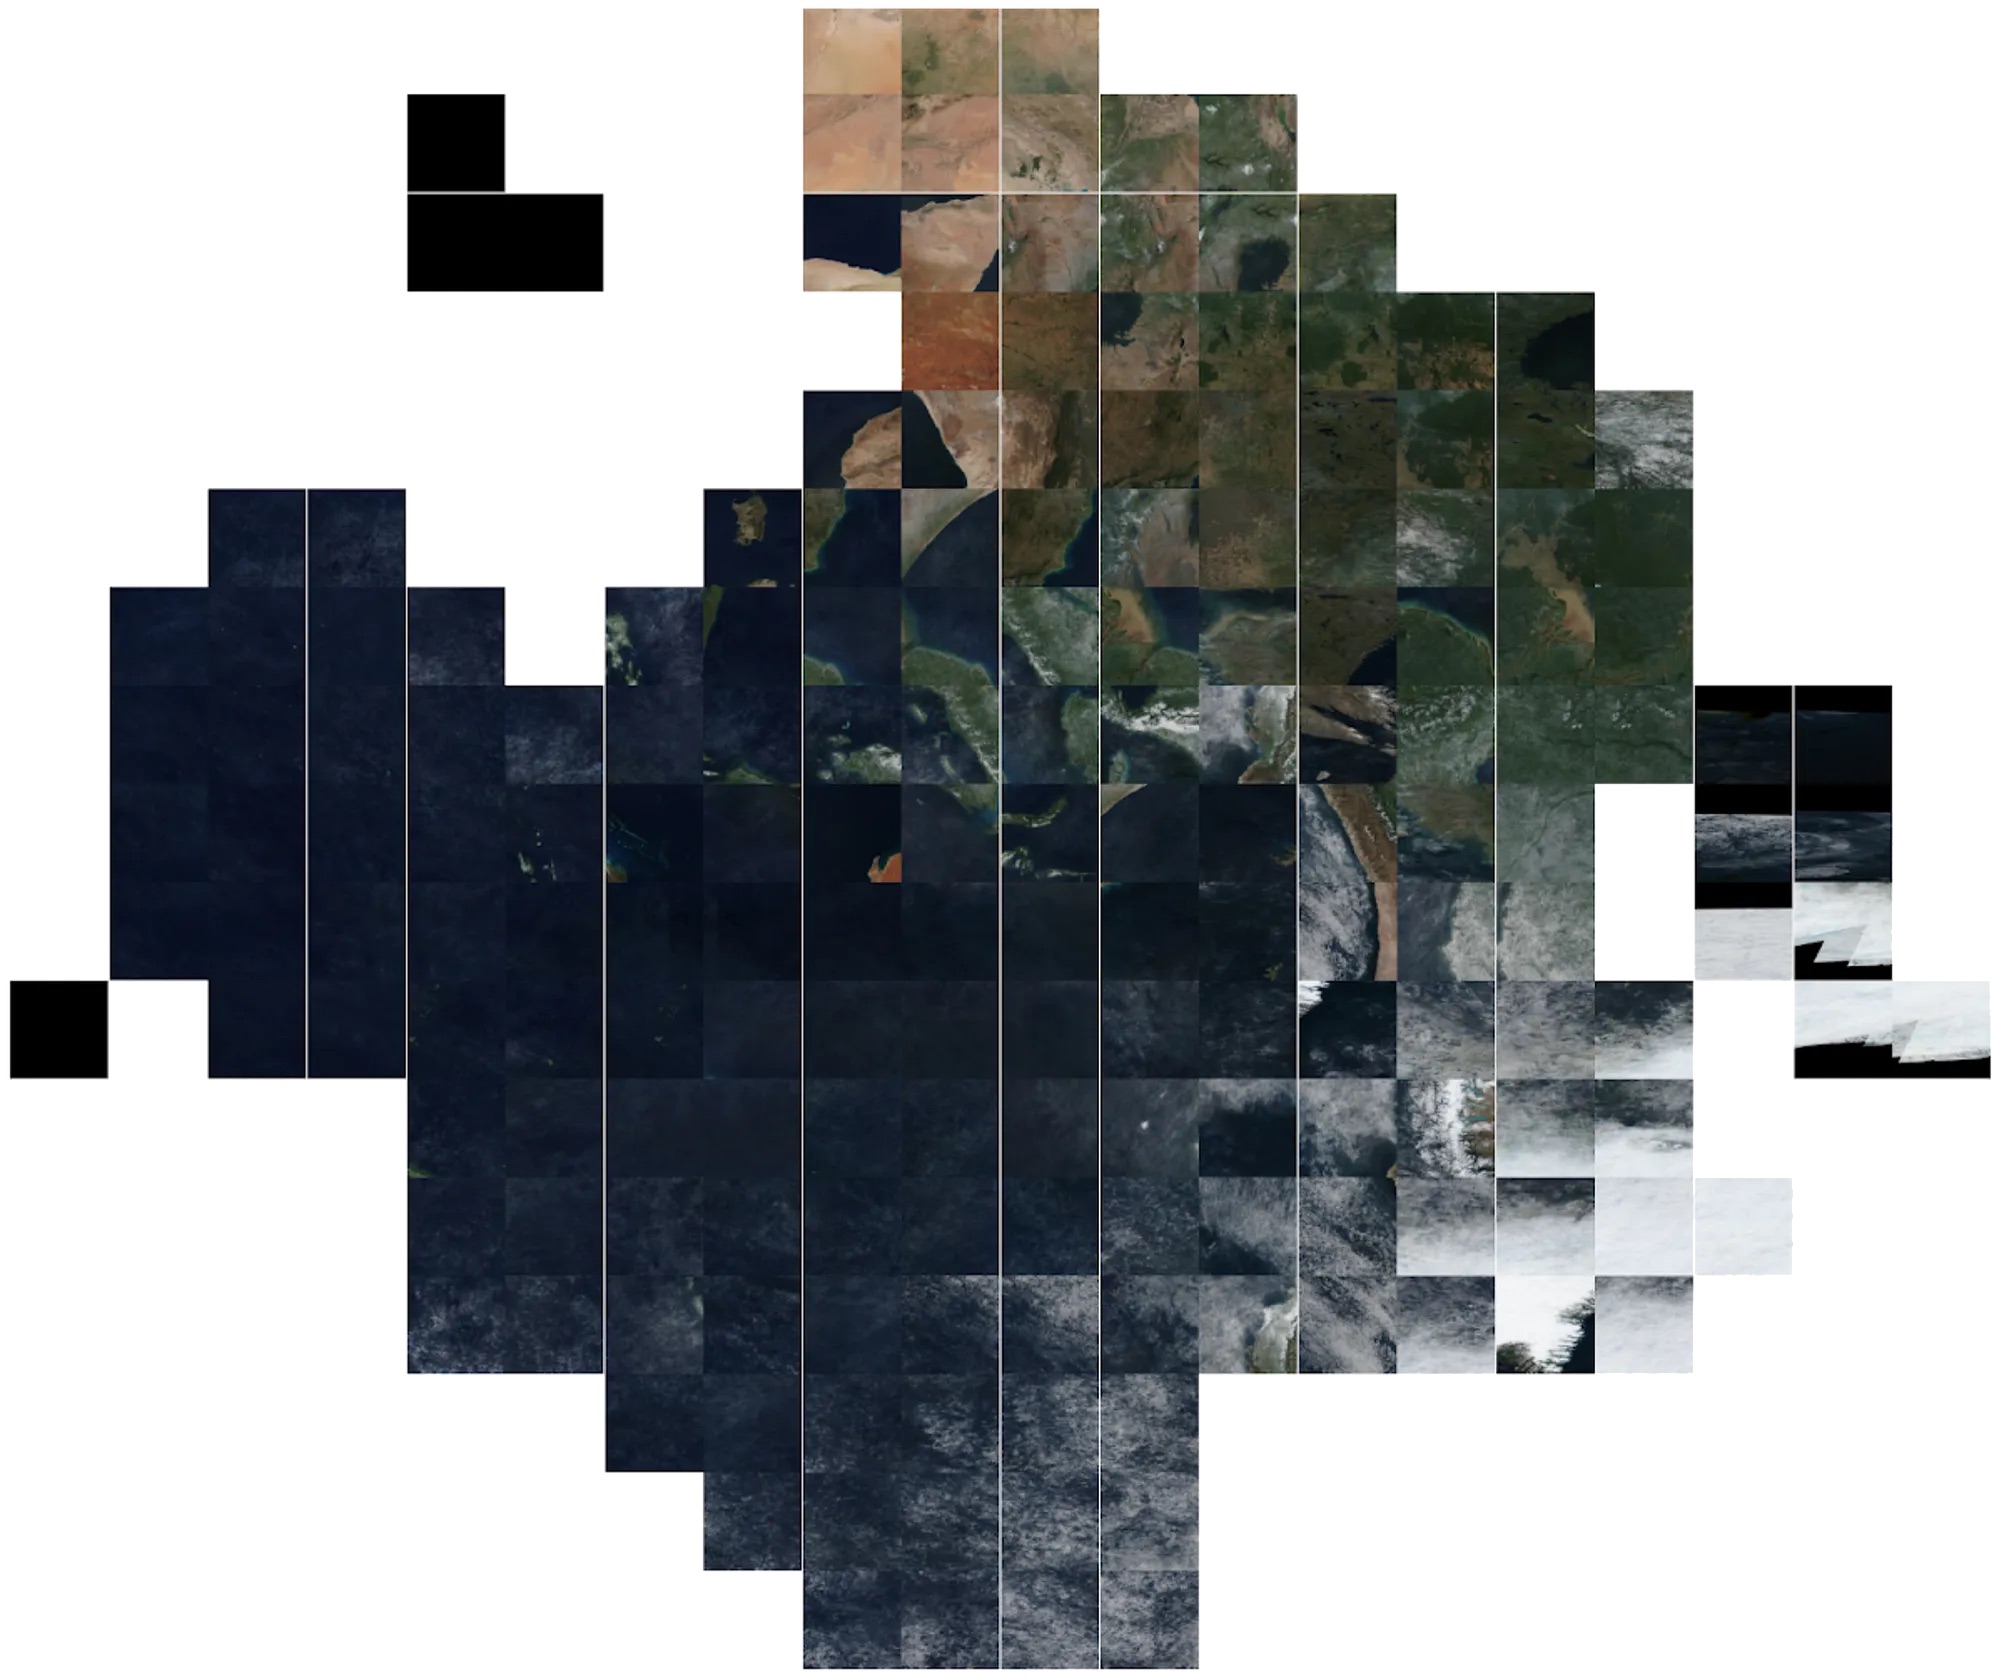 A 2 dimensional t-SNE visualization of how the self supervised learner represents satellite imagery from NASA GIBS